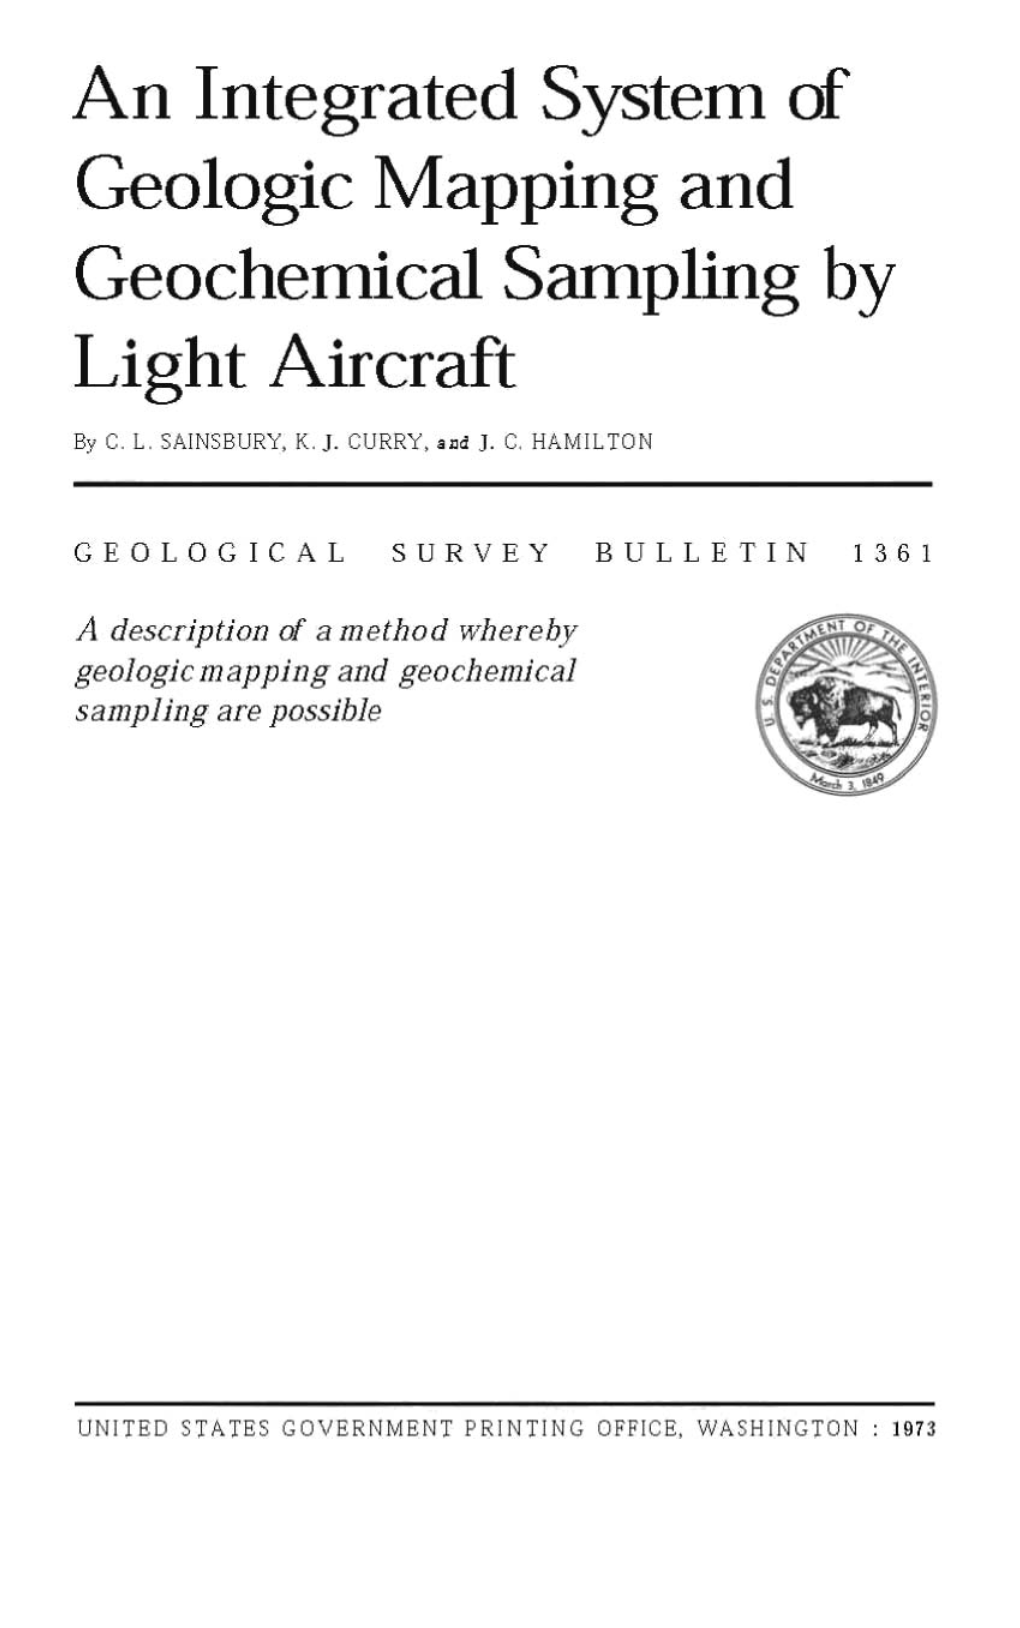 An Integrated System of Geologic Mapping and Geochemical Sampling by Light Aircraft